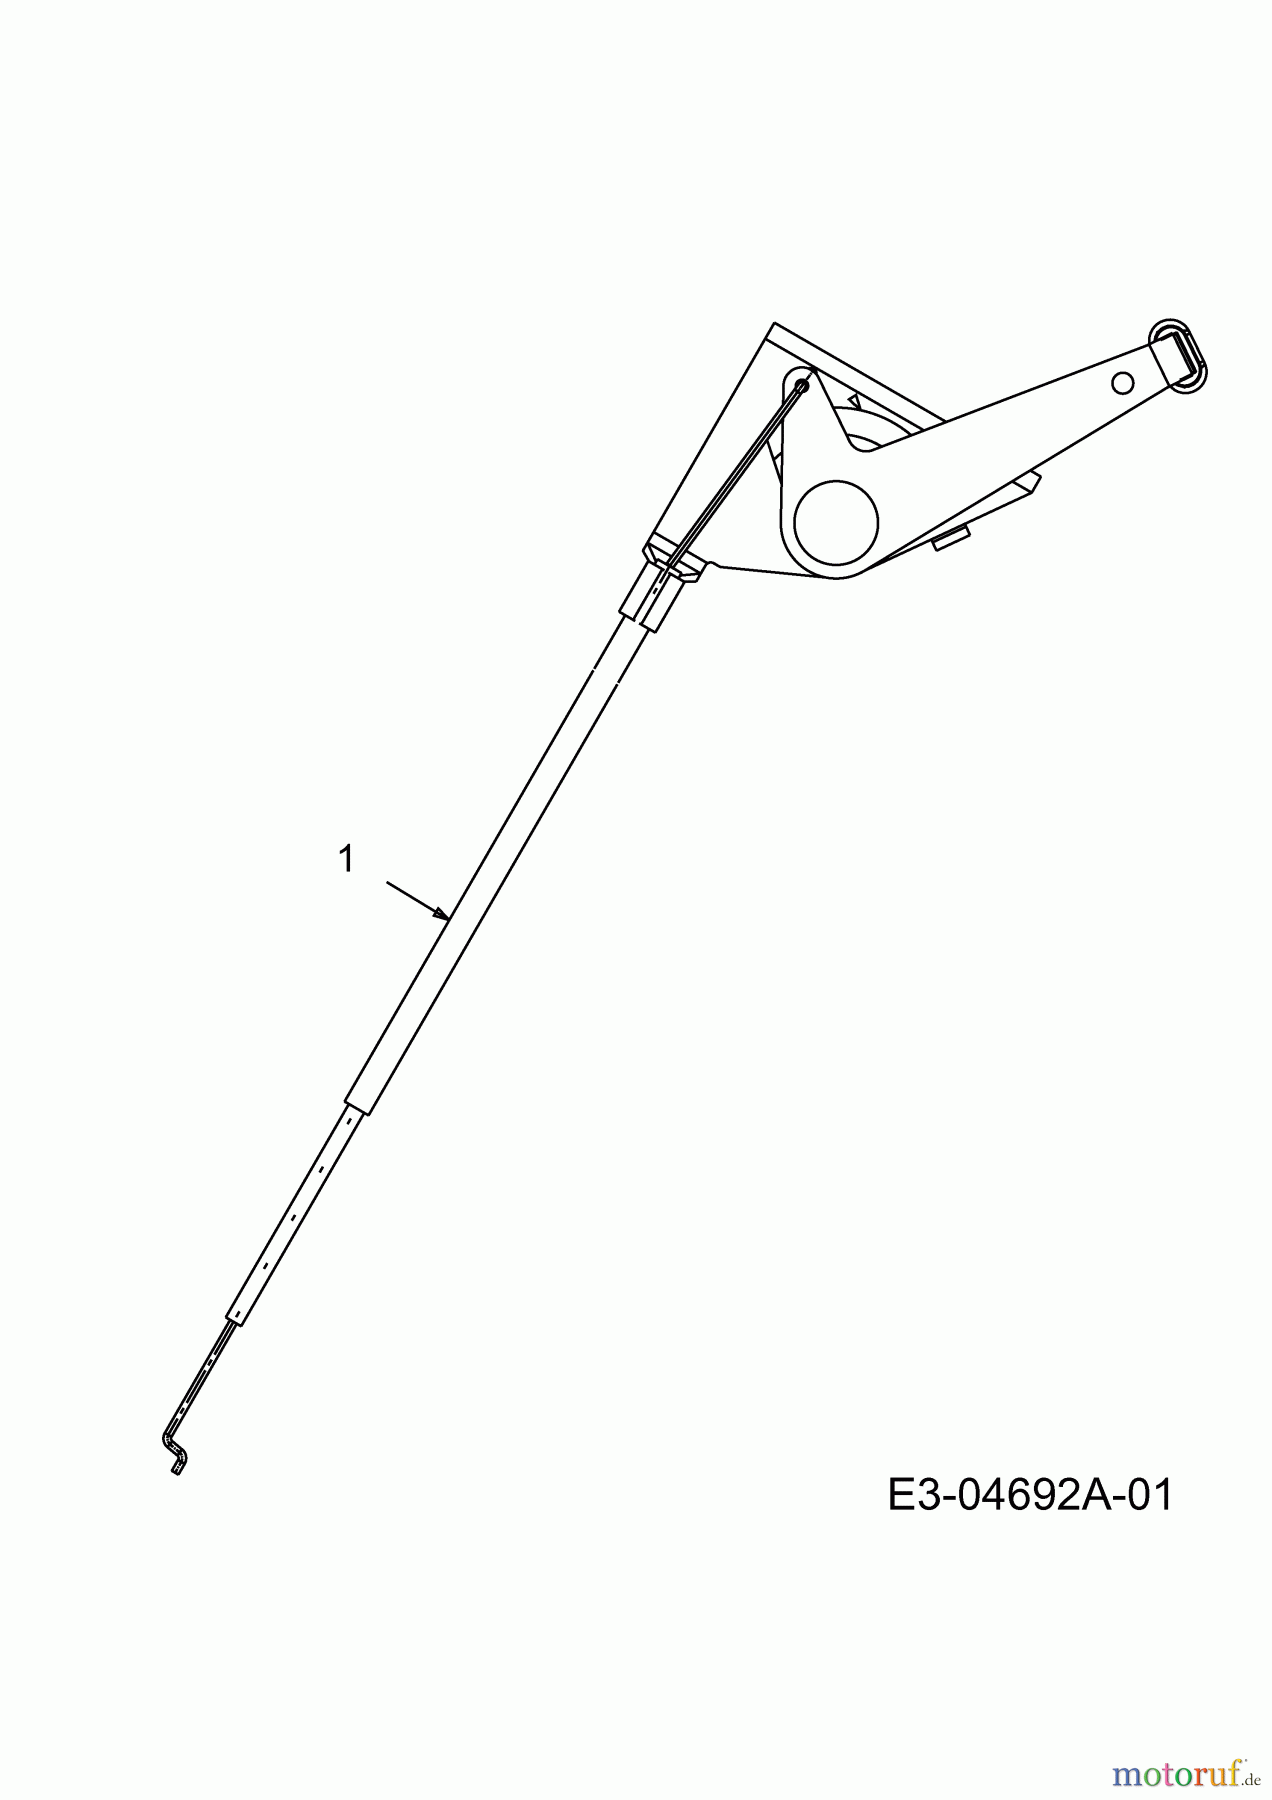  MTD untill 2011 Lawn tractors RS 115/96 13AH662F600  (2004) Throttle cable